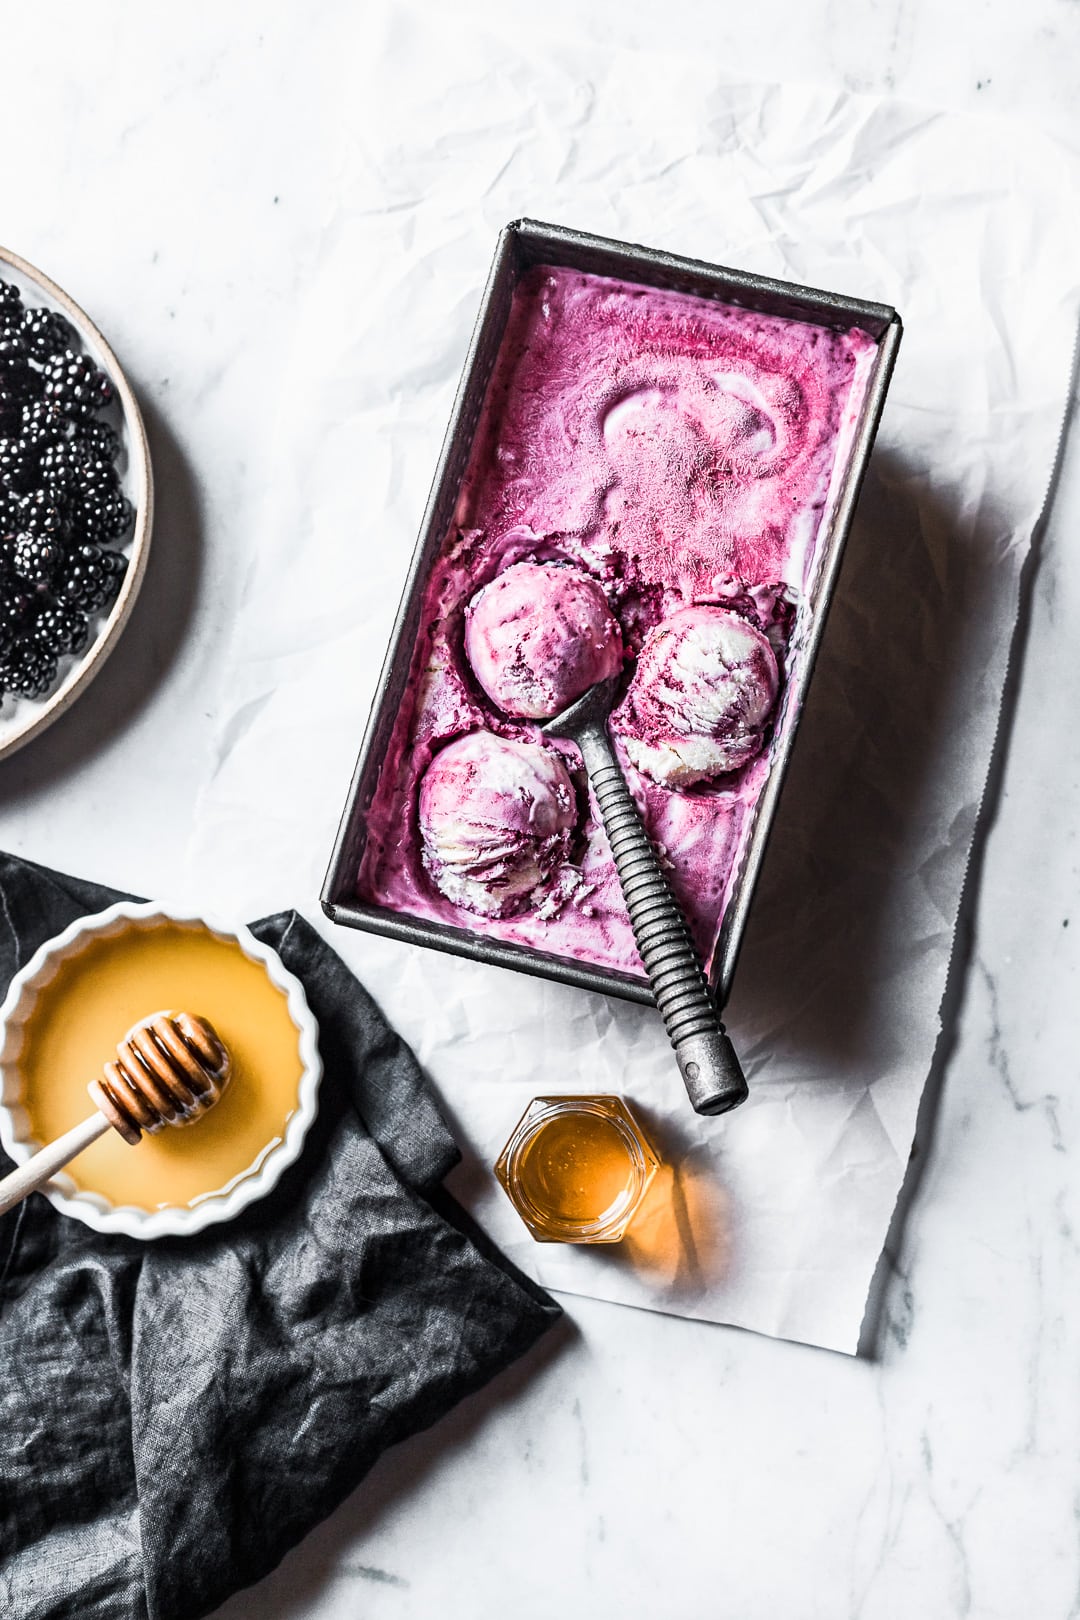 Three scoops of purple ice cream in container on a marble background with honey and blackberries nearby